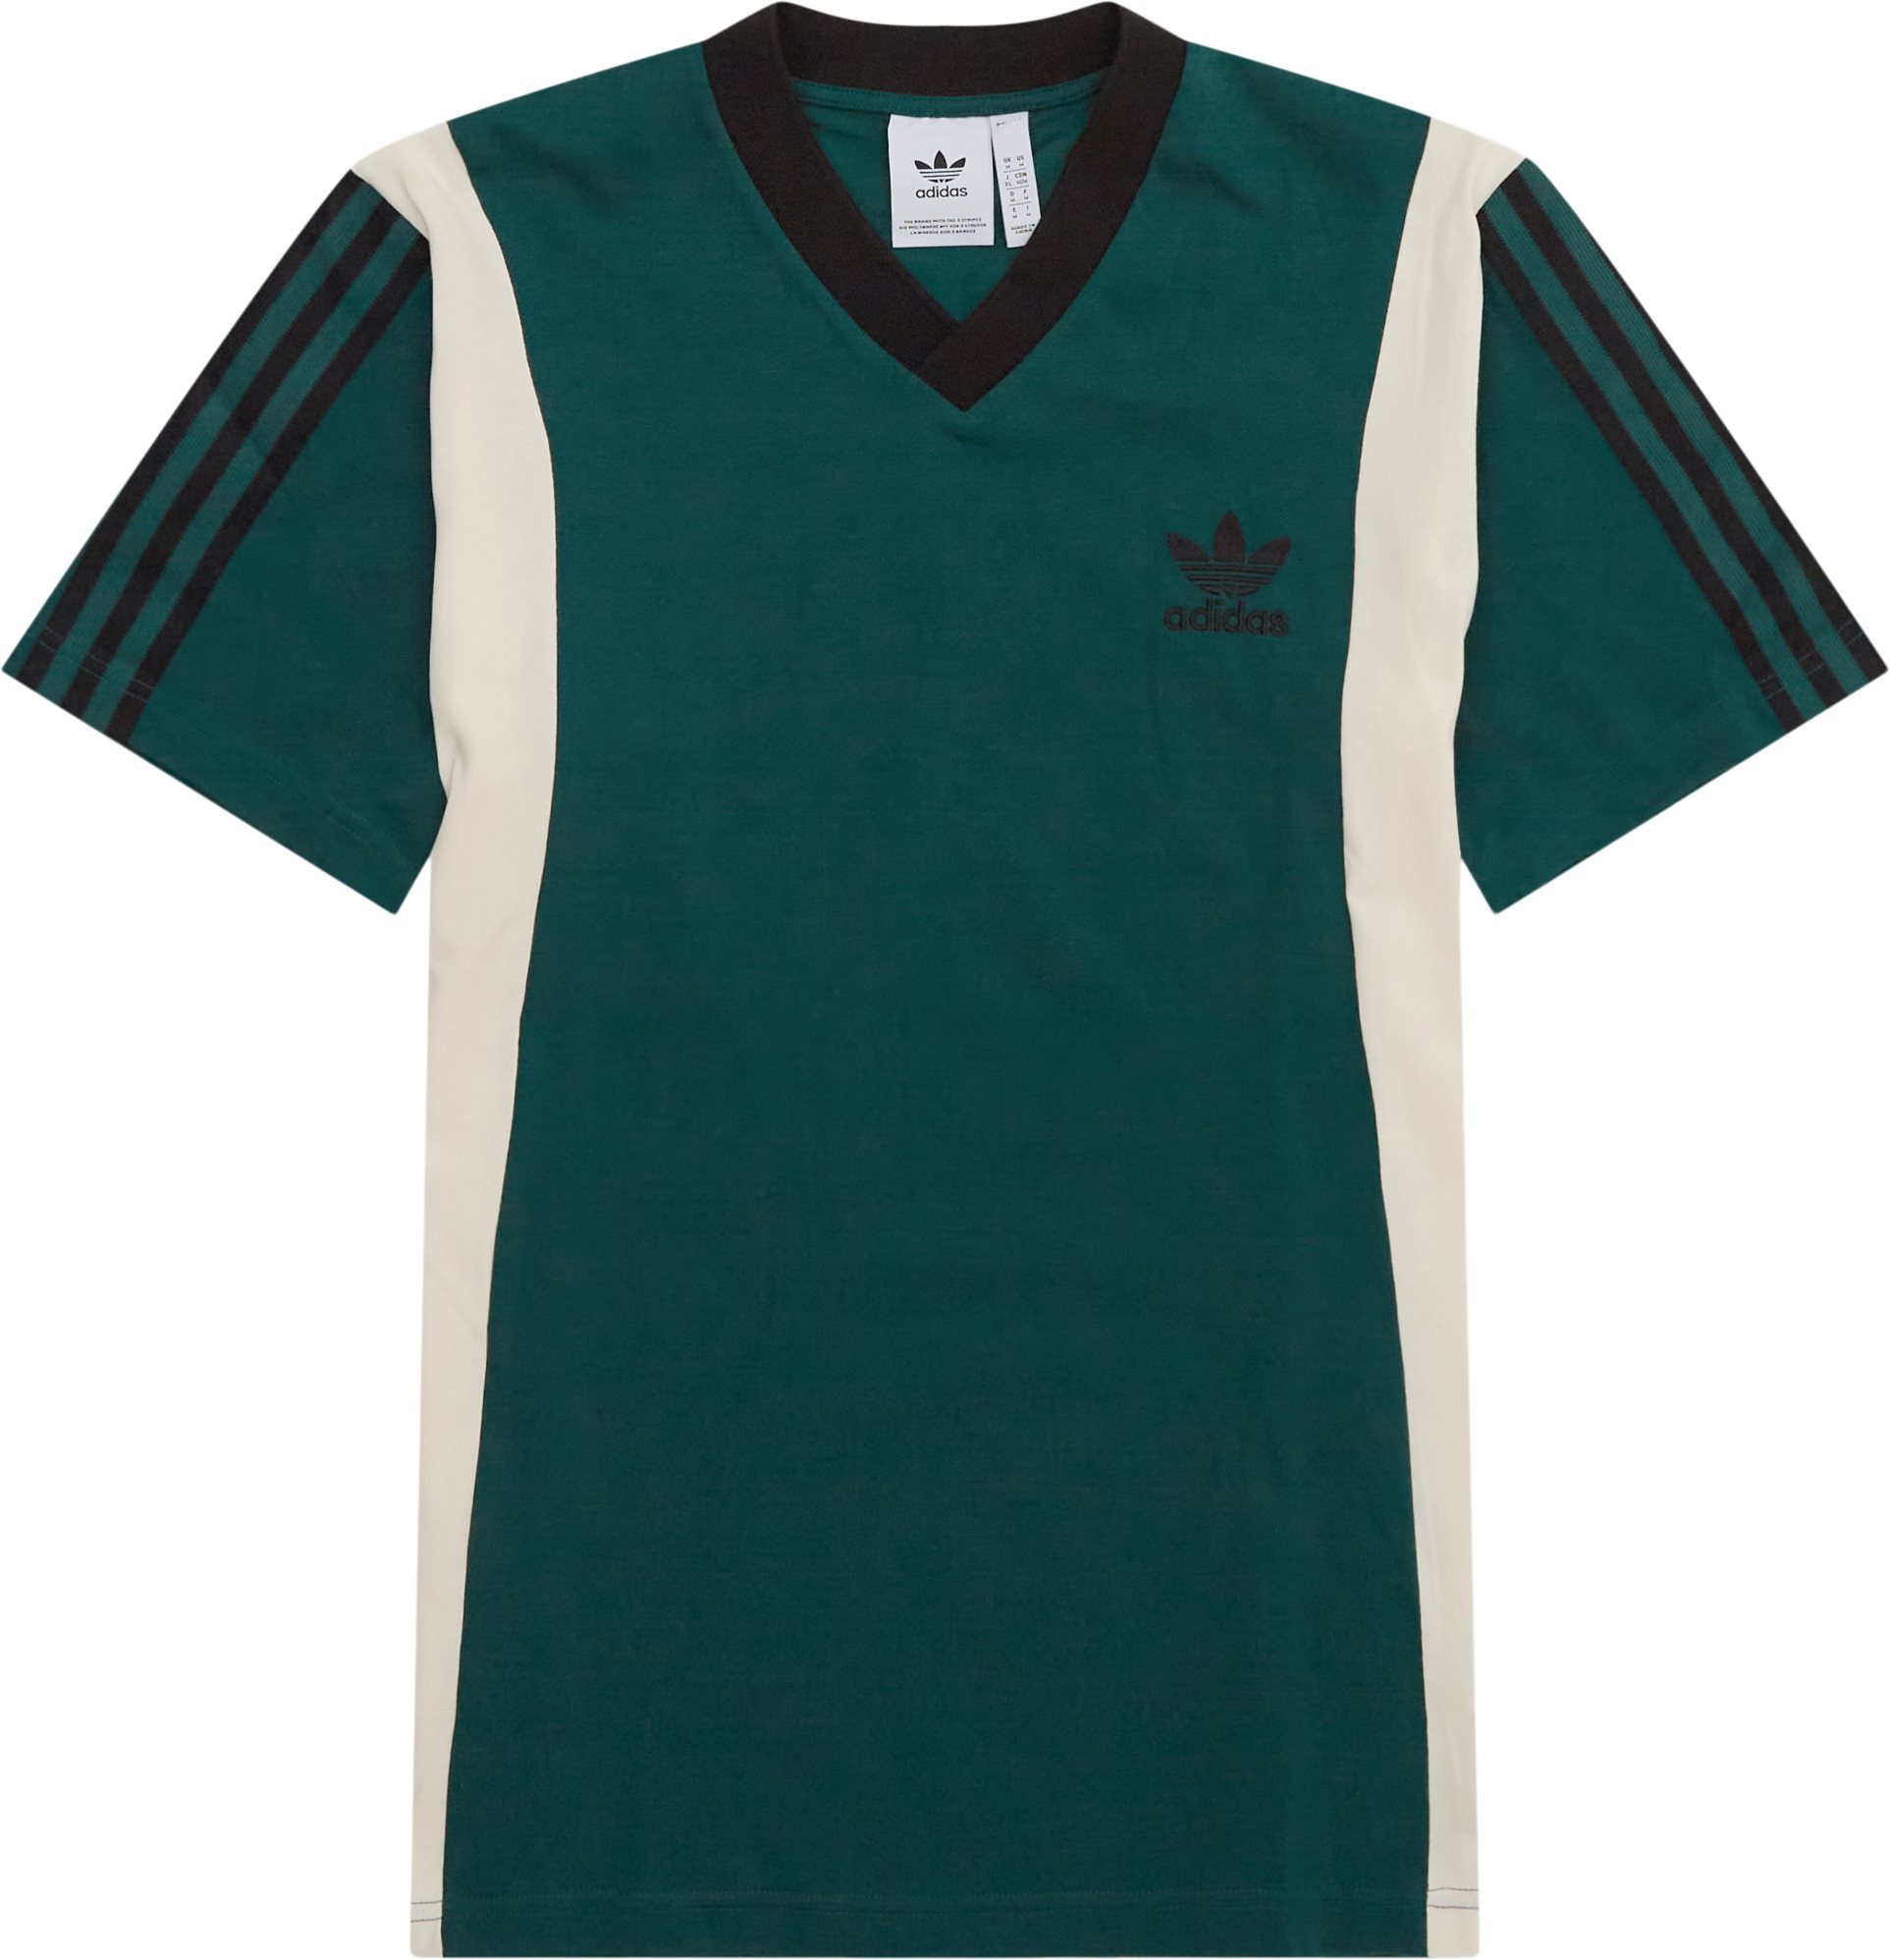 Adidas Originals T-shirts ARCHIVE TEE IS1406 Green